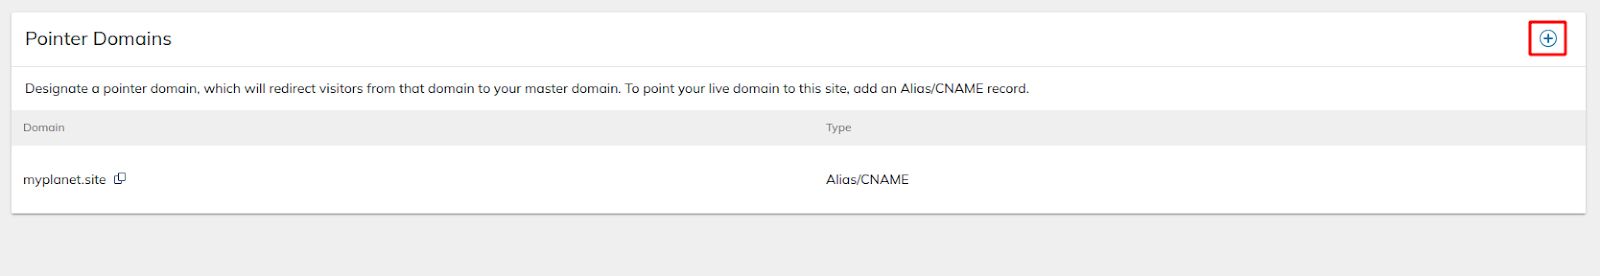 In the pointer domain section, click the ‘+’ button and provide the domain name, and choose type as Alias/CNAME in the pop up. 